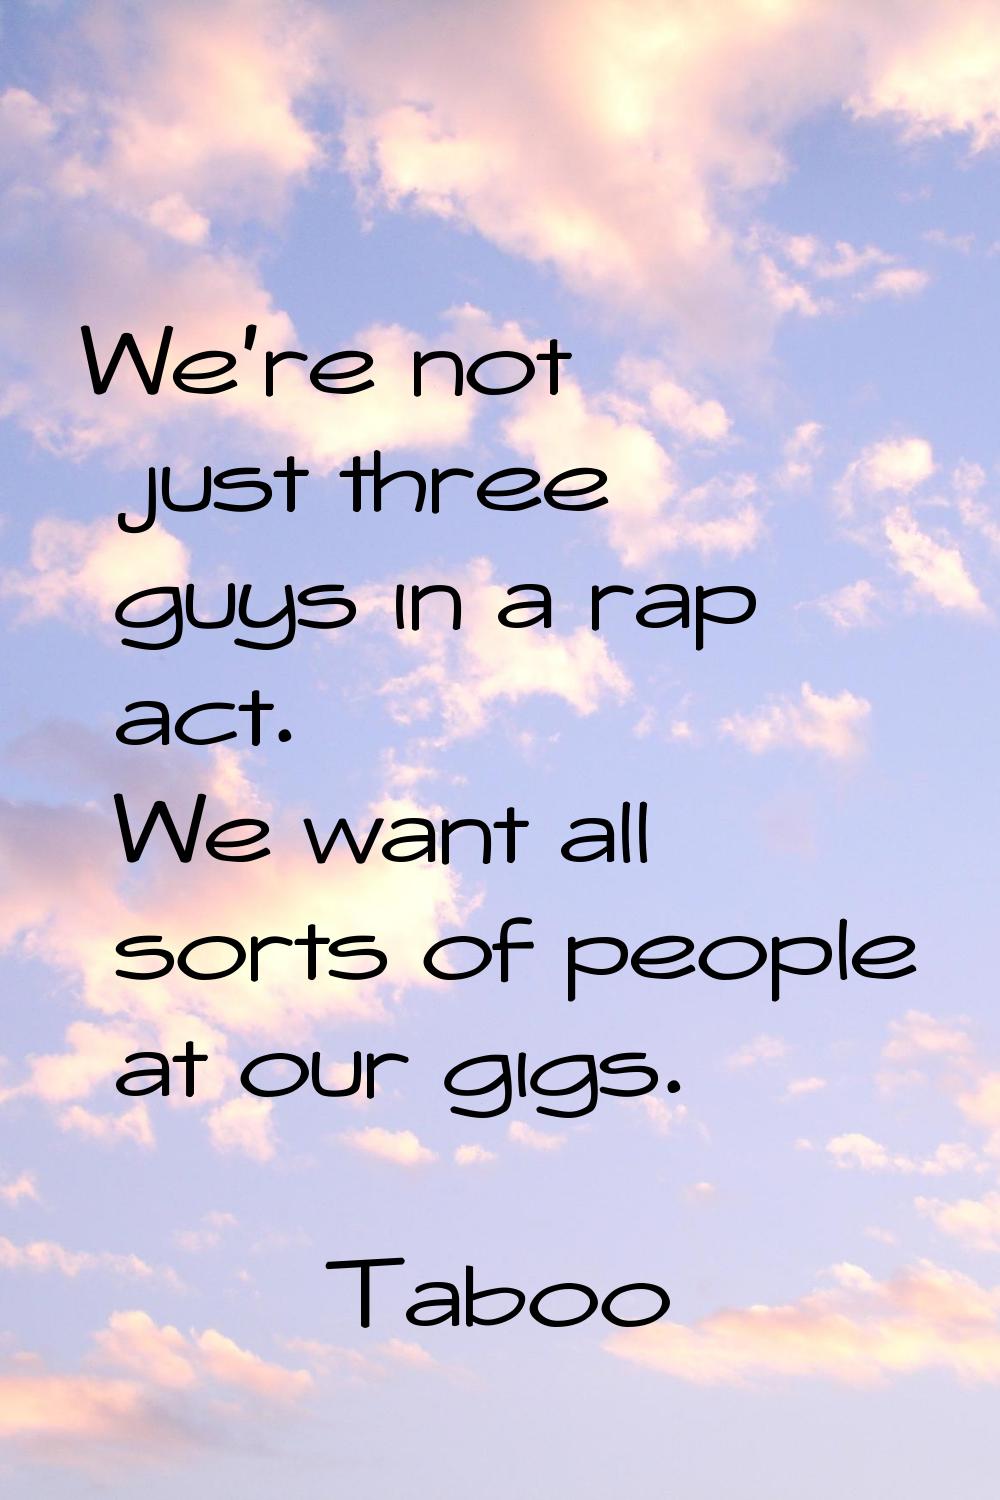 We're not just three guys in a rap act. We want all sorts of people at our gigs.